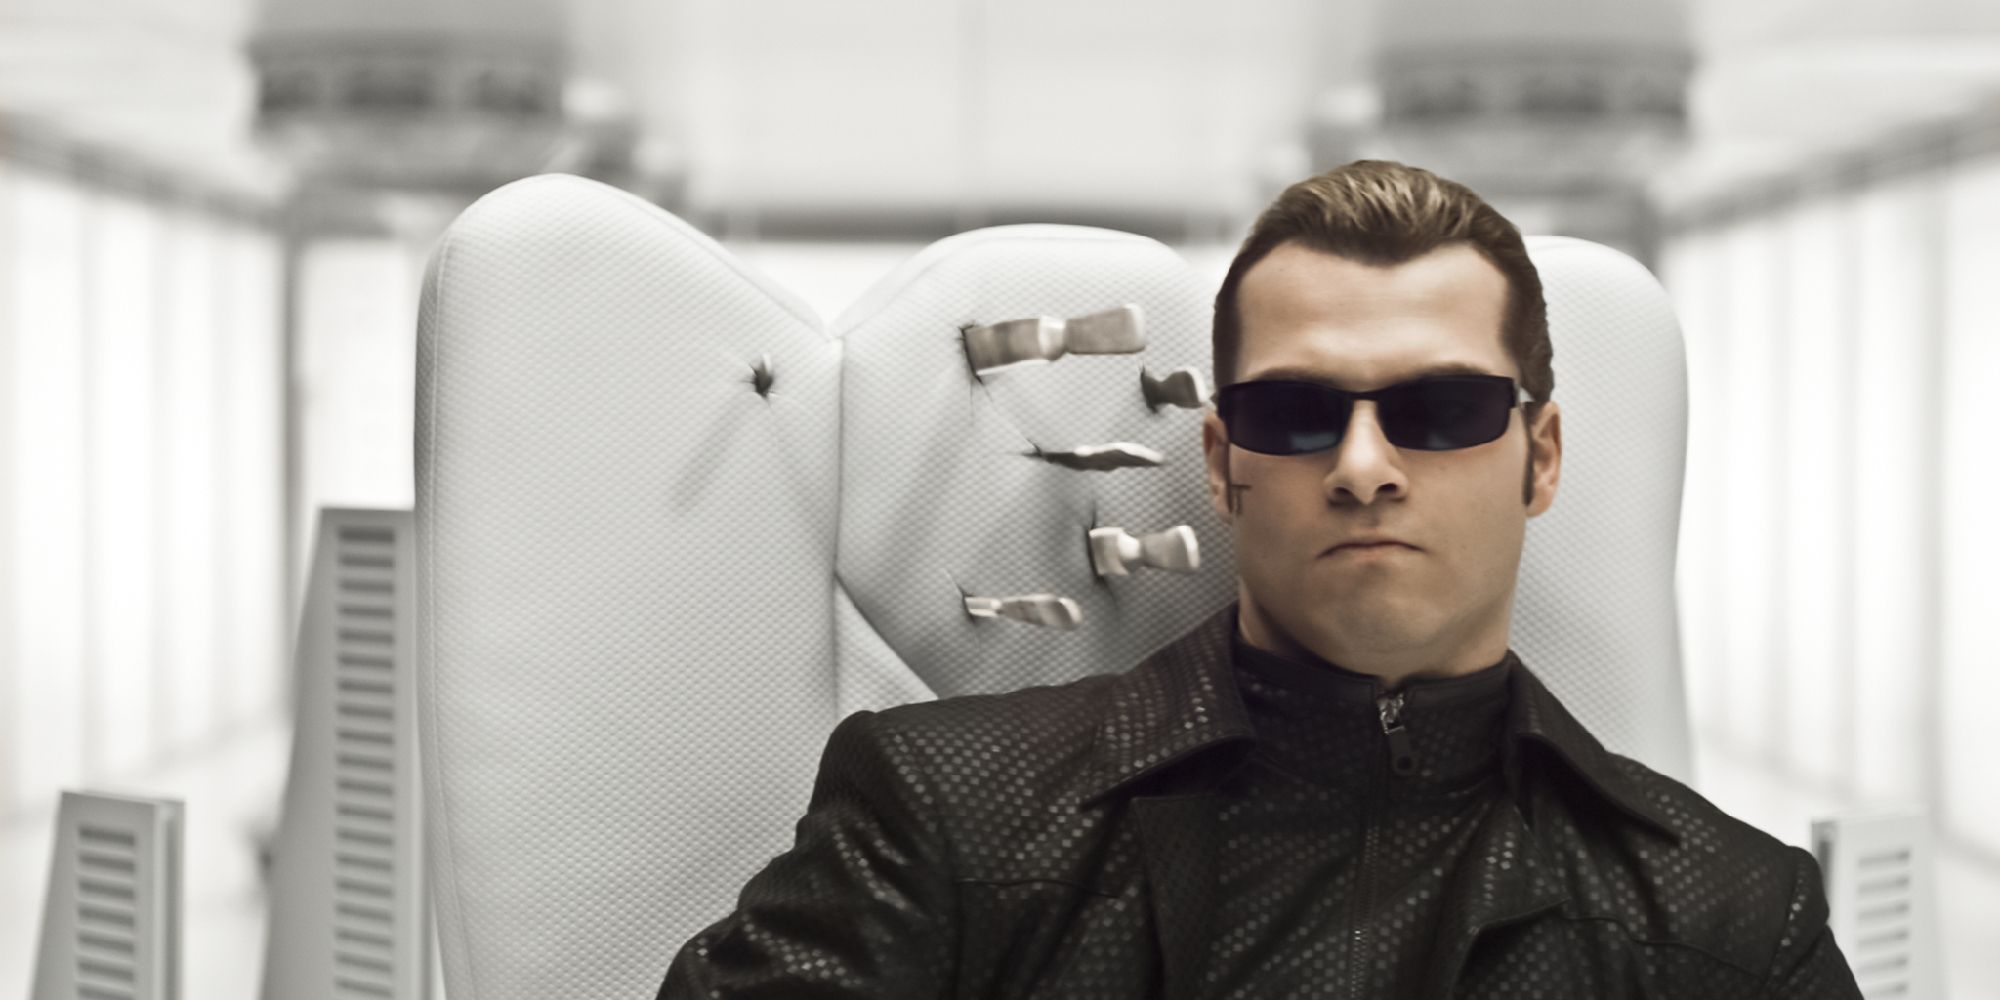 Wesker sat in a white chair in a clinically white room, the back of the chair next to his head skewered by several combat knives.